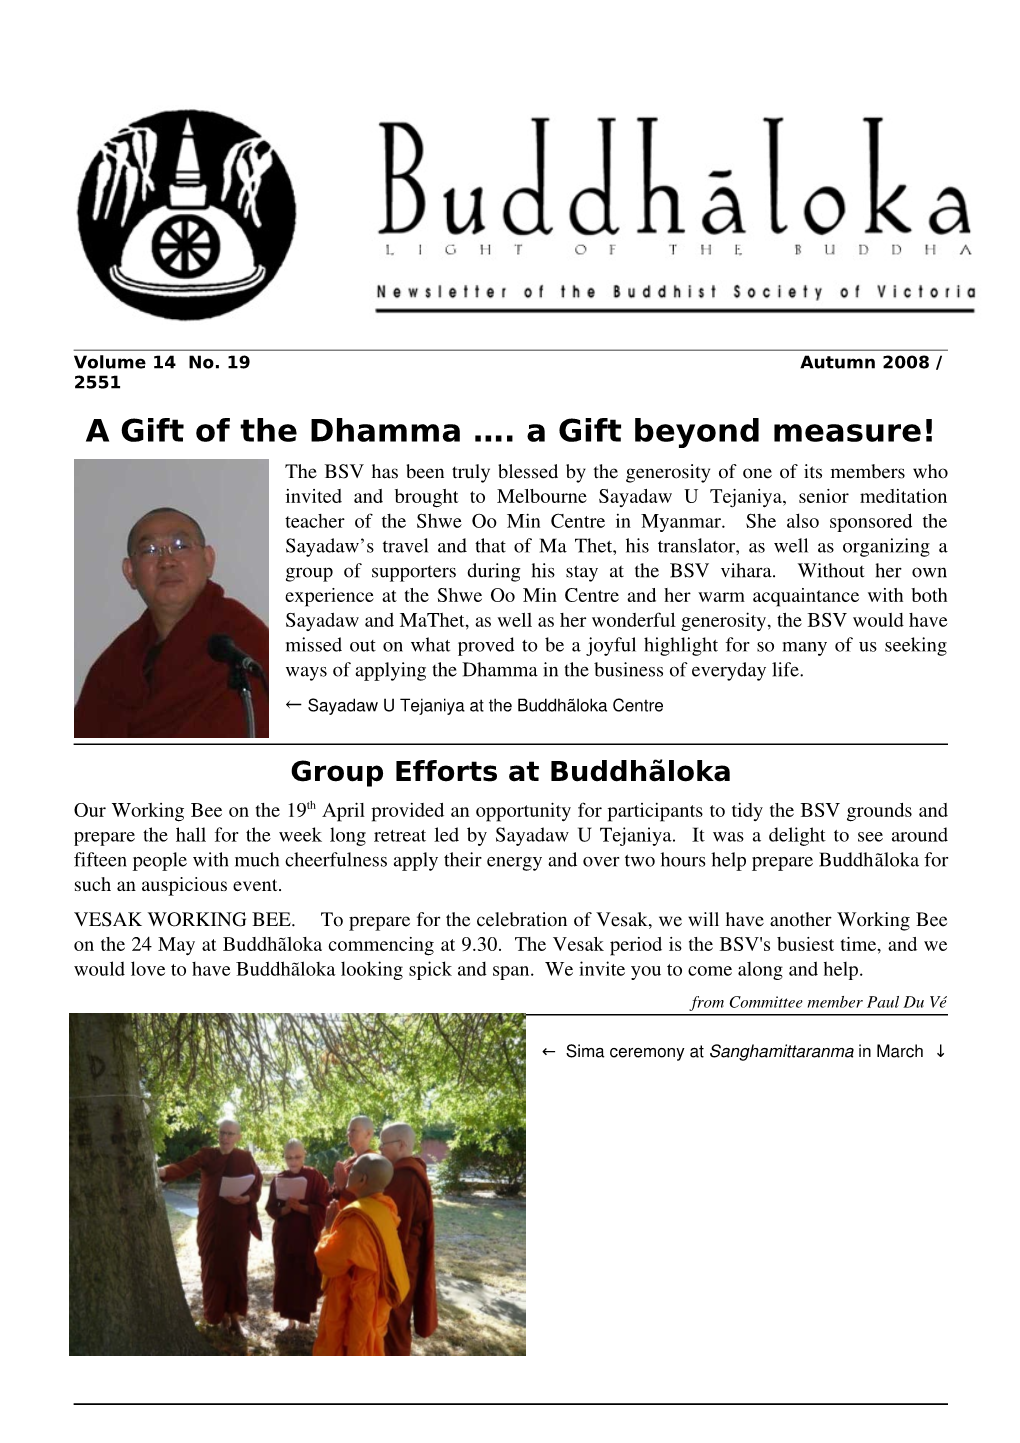 A Gift of the Dhamma …. a Gift Beyond Measure!